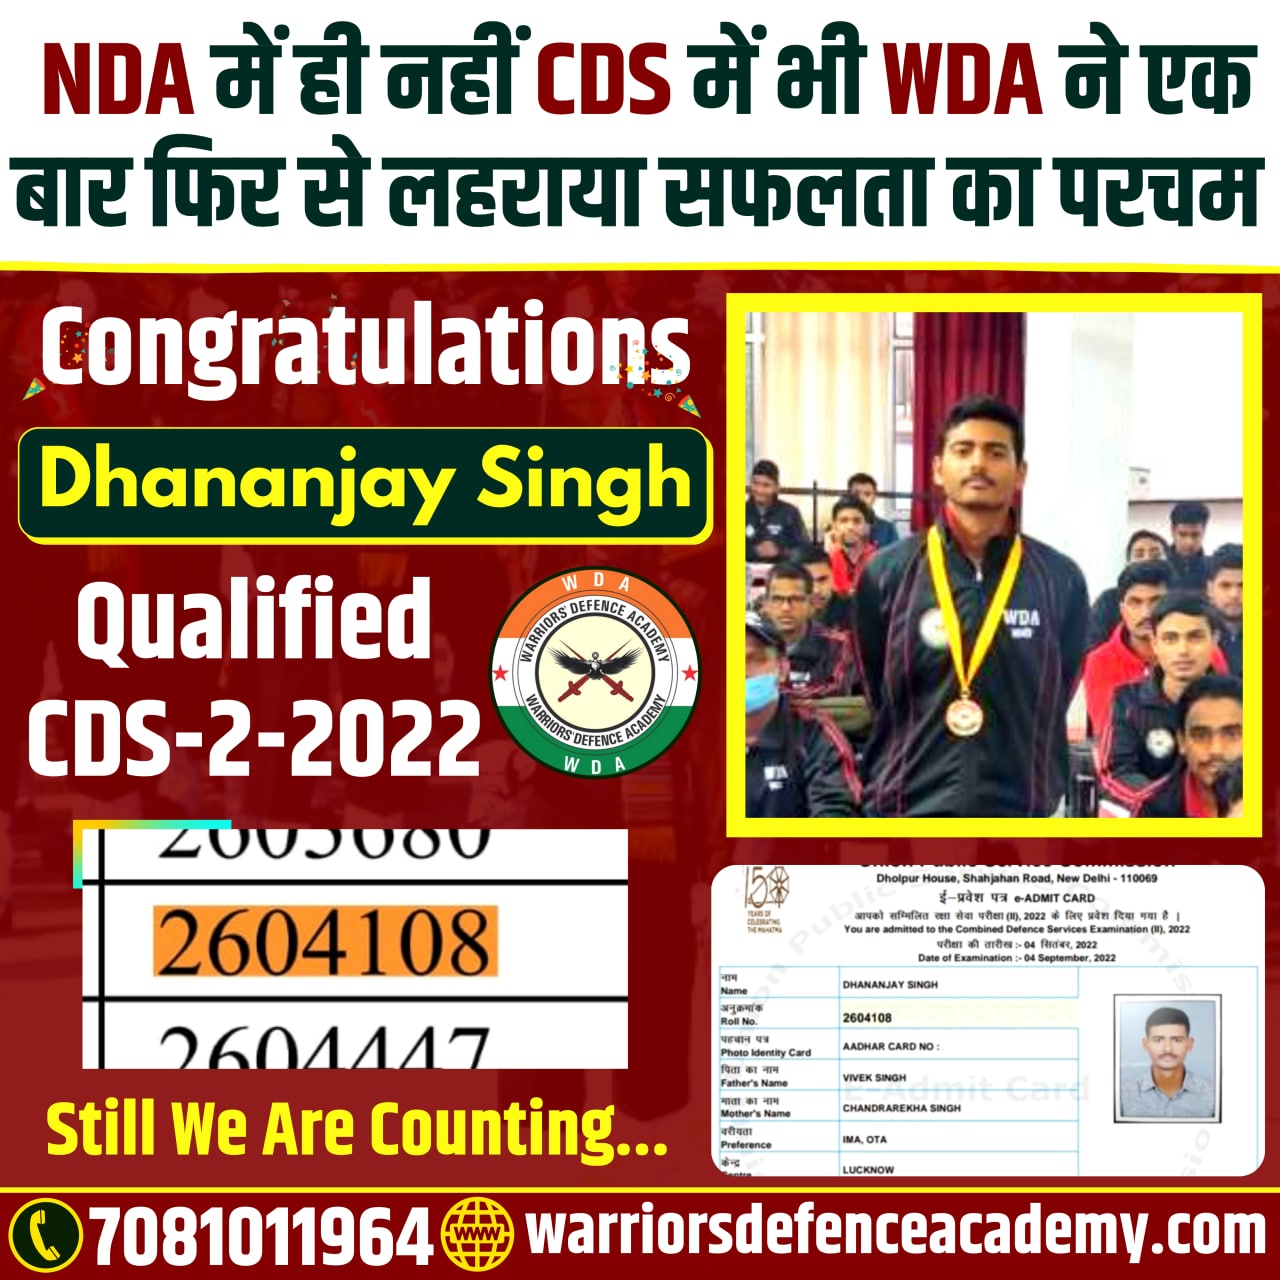 Best Defence Academy in Lucknow